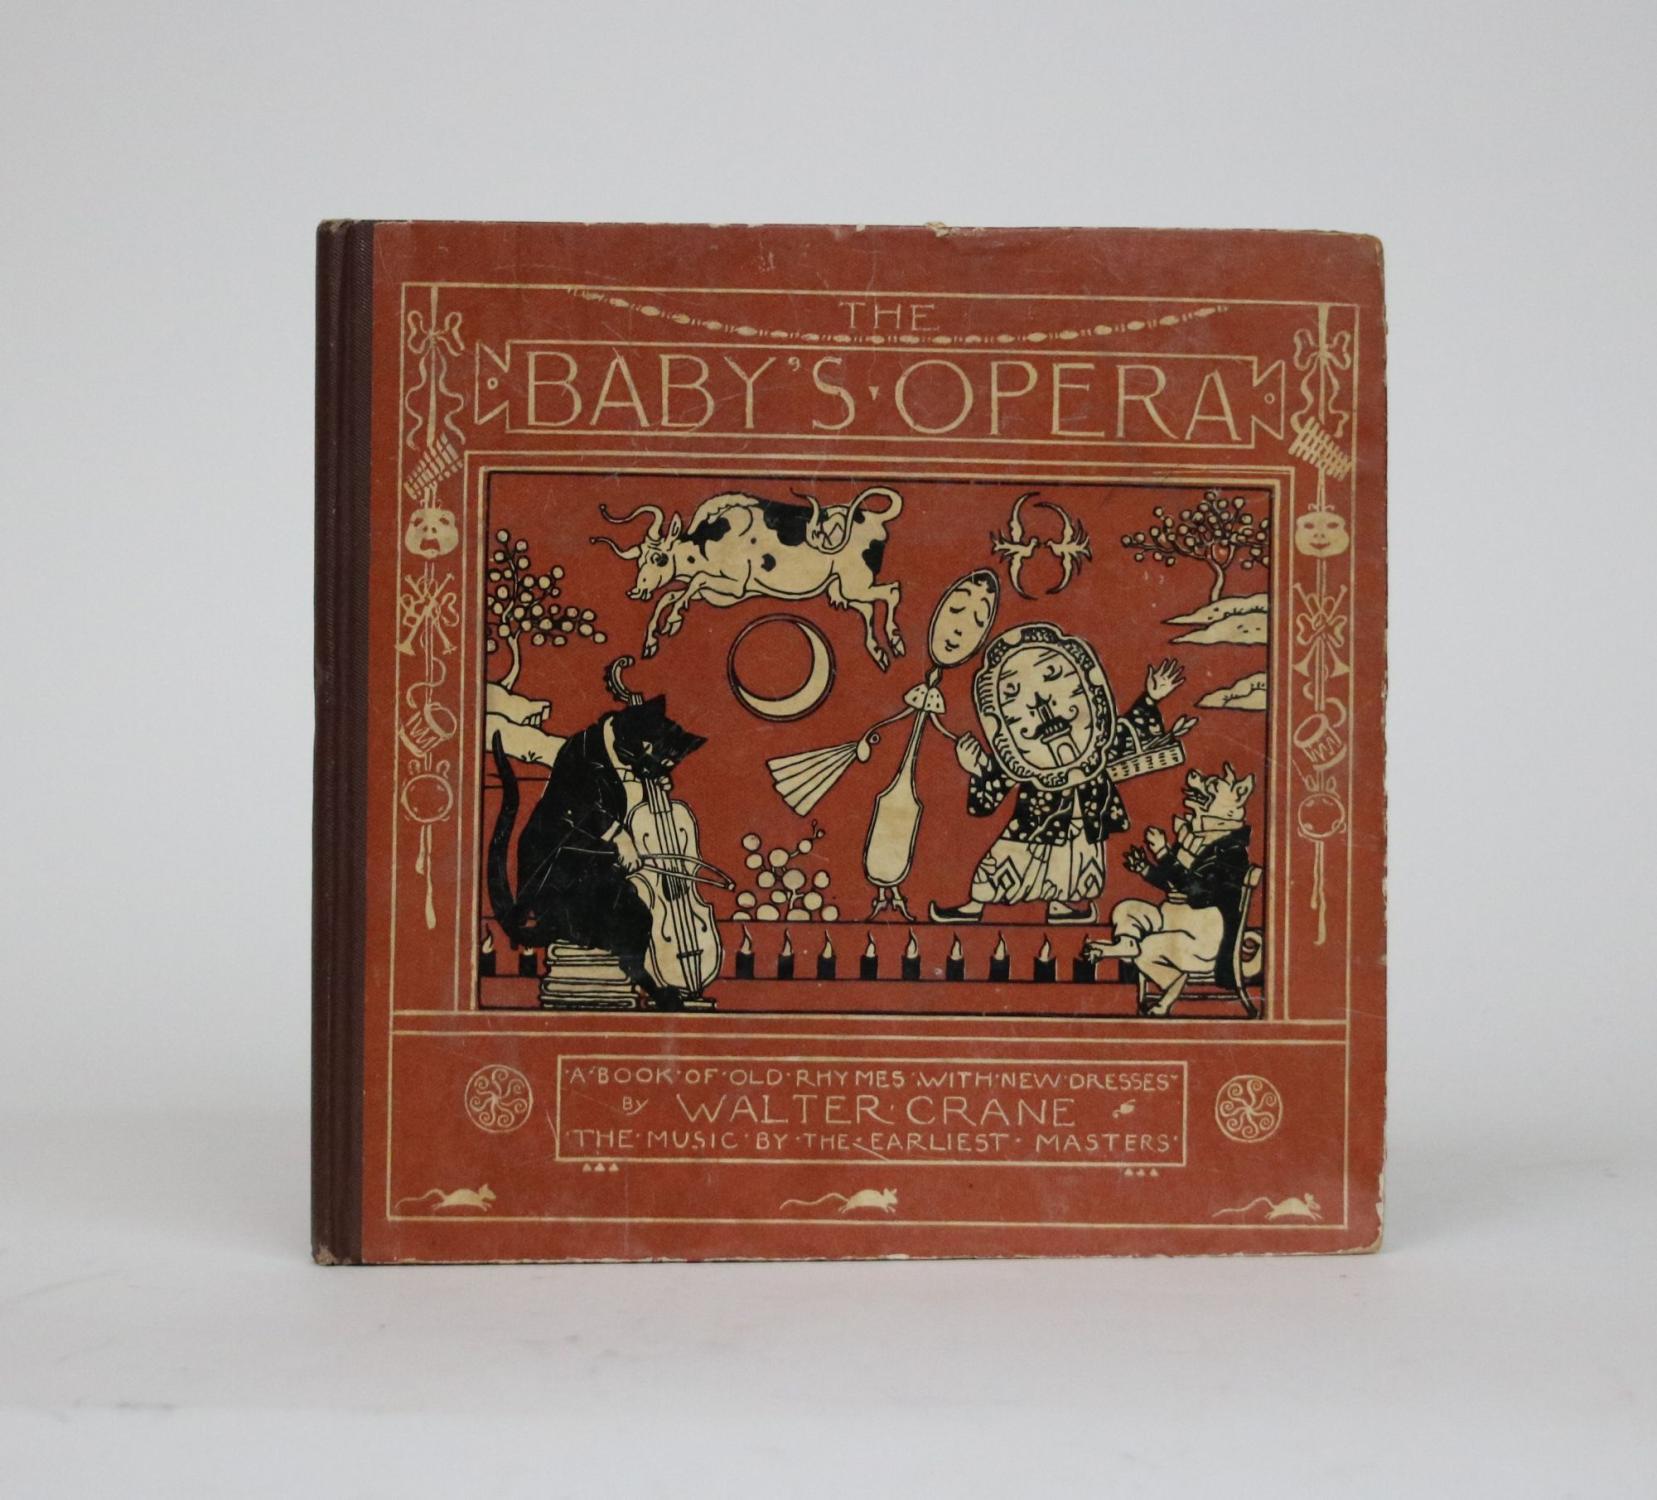 The Baby's Opera: A Book of Old Rhymes with New Dresses, The Music by the Earliest Masters - Crane, Walter